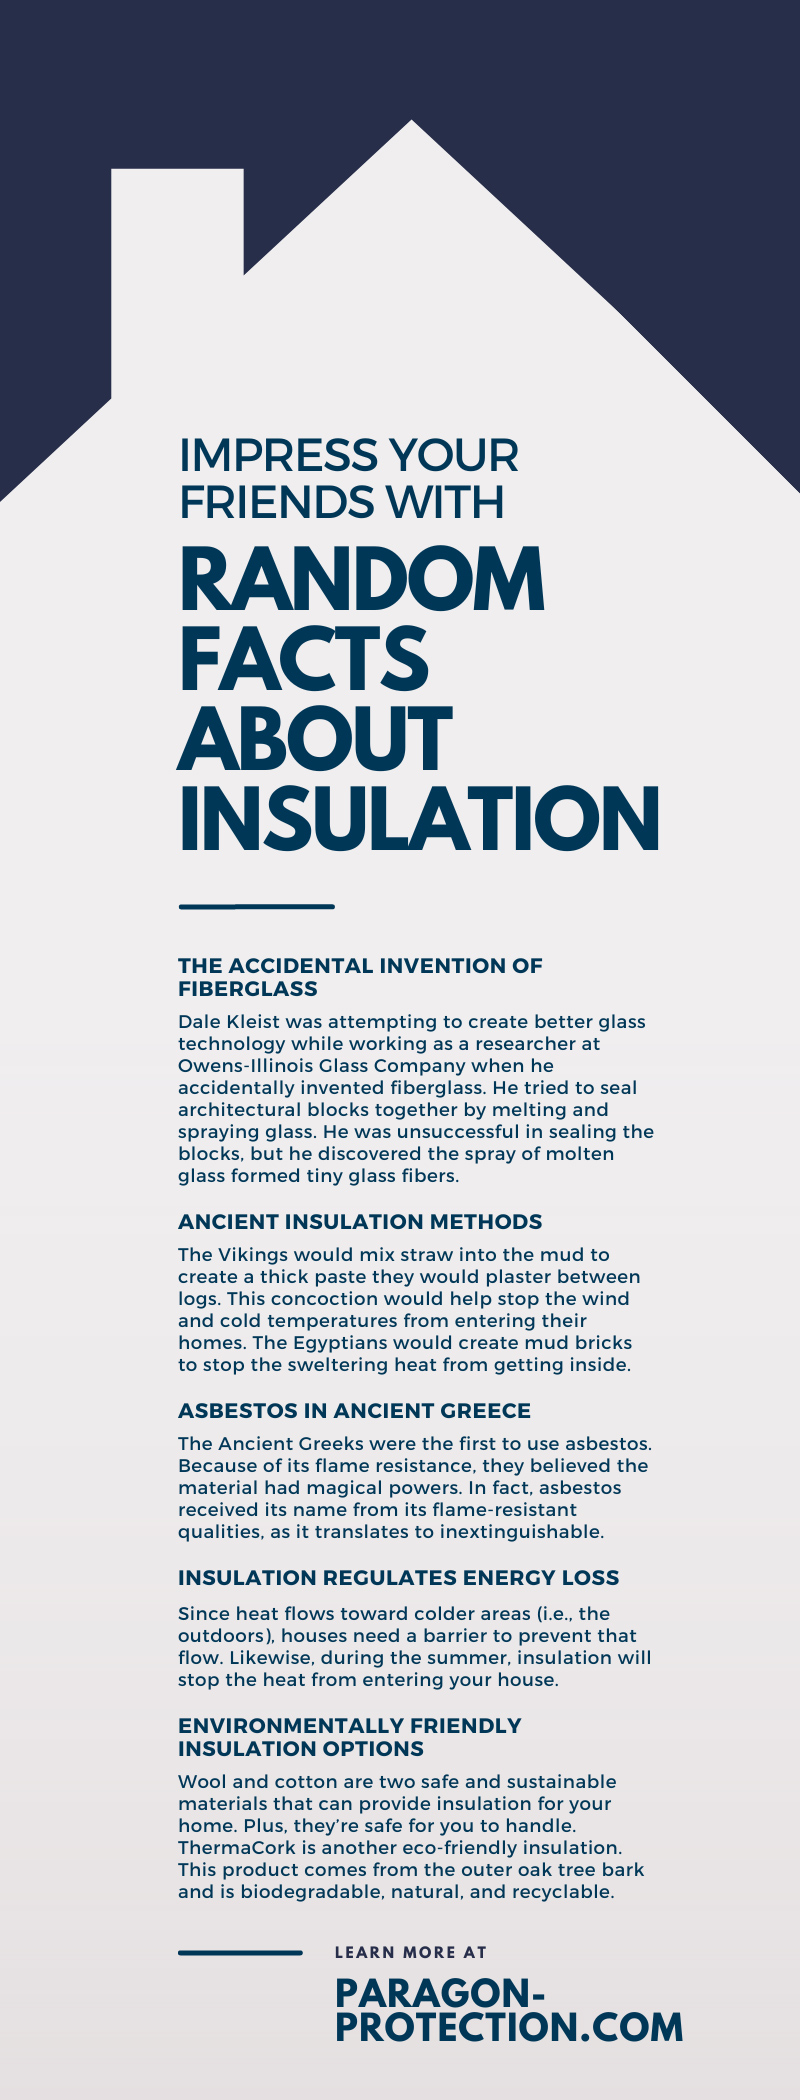 Impress Your Friends With 10 Random Facts About Insulation
